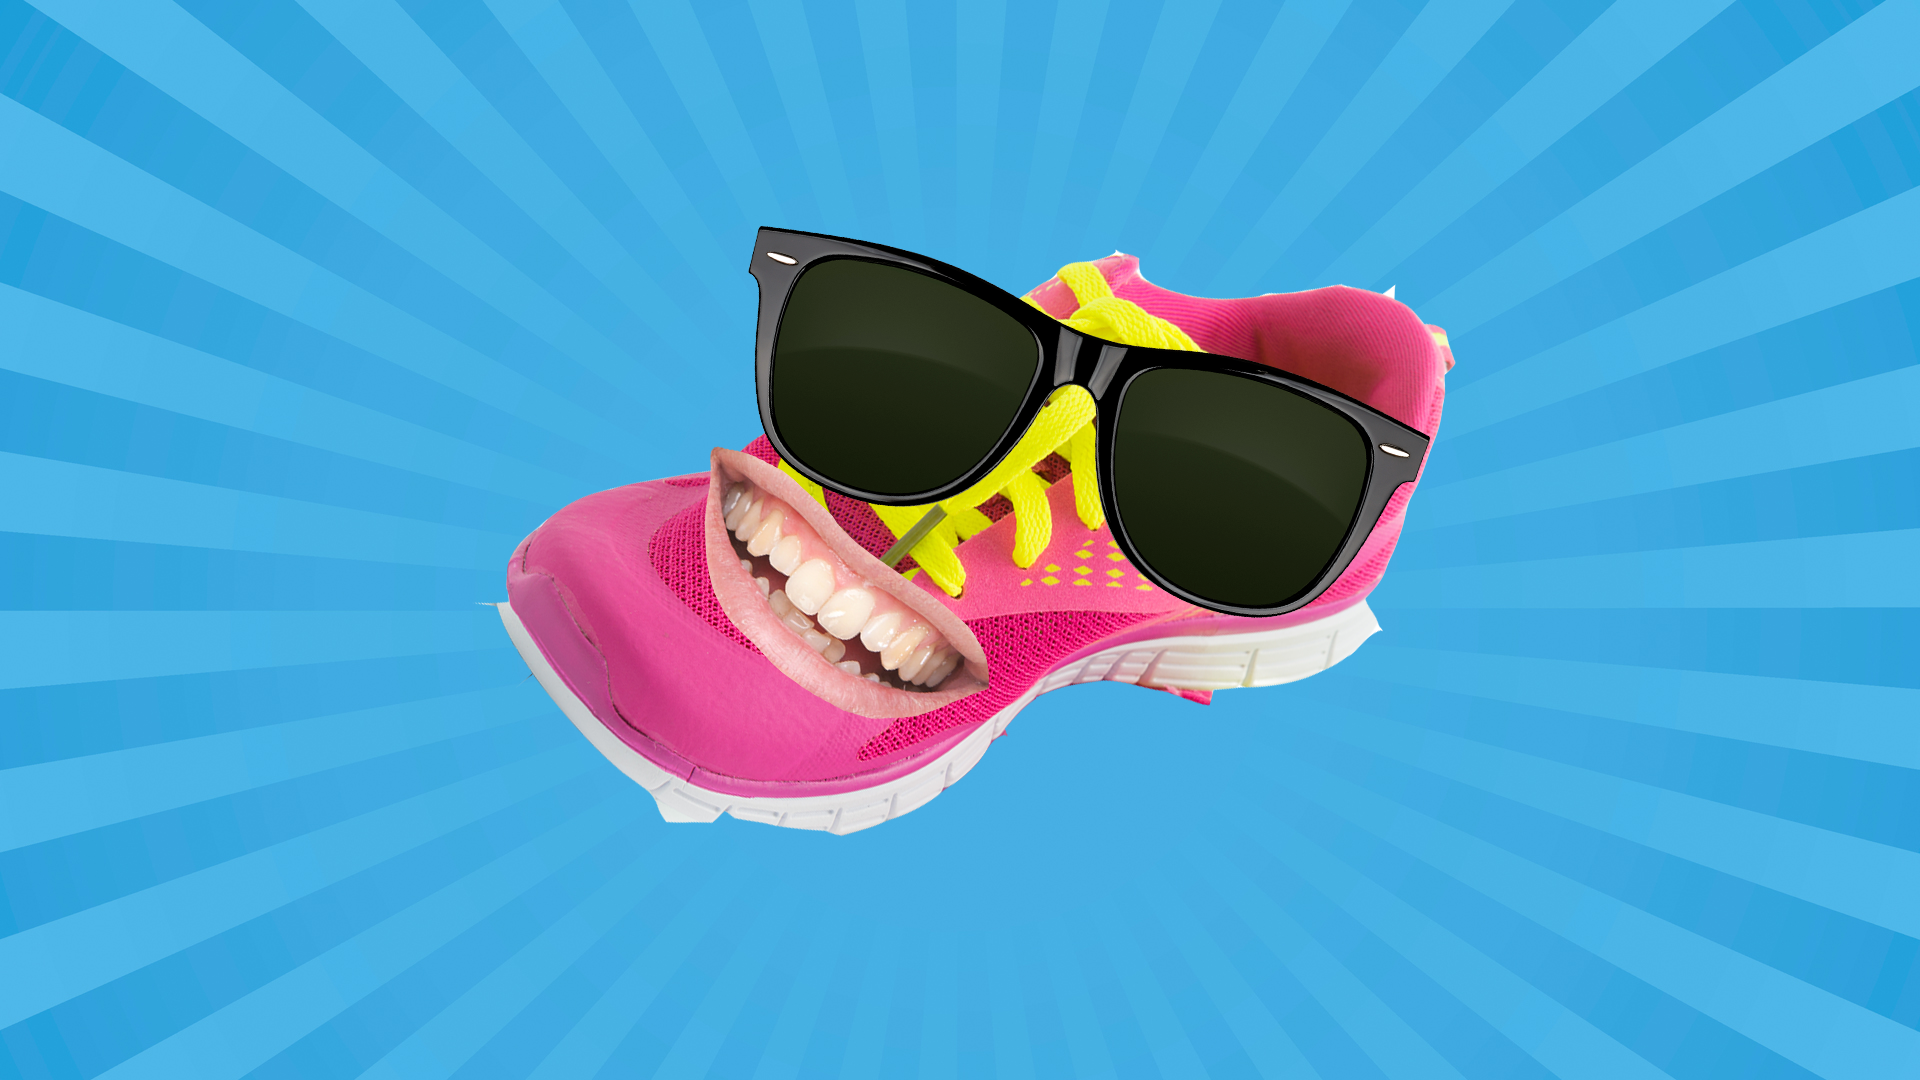 A grinning pink trainer